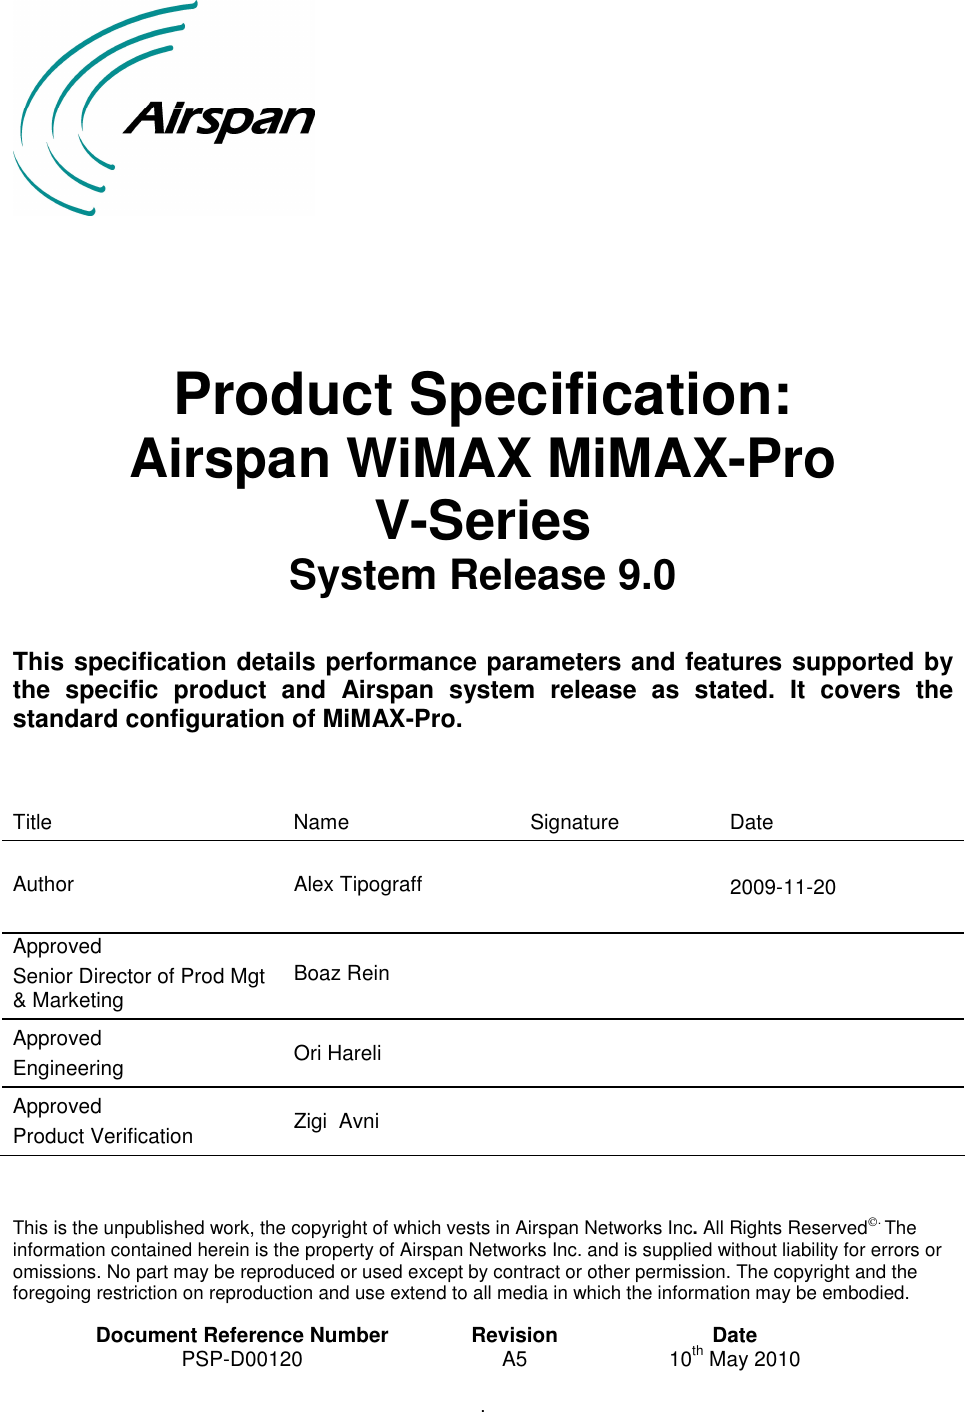          Product Specification: Airspan WiMAX MiMAX-Pro V-Series  System Release 9.0  This specification details performance parameters and features supported by the  specific  product  and  Airspan  system  release  as  stated.  It  covers  the standard configuration of MiMAX-Pro.    Title  Name  Signature  Date  Author  Alex Tipograff    2009-11-20 Approved Senior Director of Prod Mgt &amp; Marketing Boaz Rein     Approved Engineering  Ori Hareli     Approved Product Verification  Zigi  Avni         This is the unpublished work, the copyright of which vests in Airspan Networks Inc. All Rights Reserved. The information contained herein is the property of Airspan Networks Inc. and is supplied without liability for errors or omissions. No part may be reproduced or used except by contract or other permission. The copyright and the foregoing restriction on reproduction and use extend to all media in which the information may be embodied.  Document Reference Number  Revision  Date PSP-D00120  A5  10th May 2010 .   